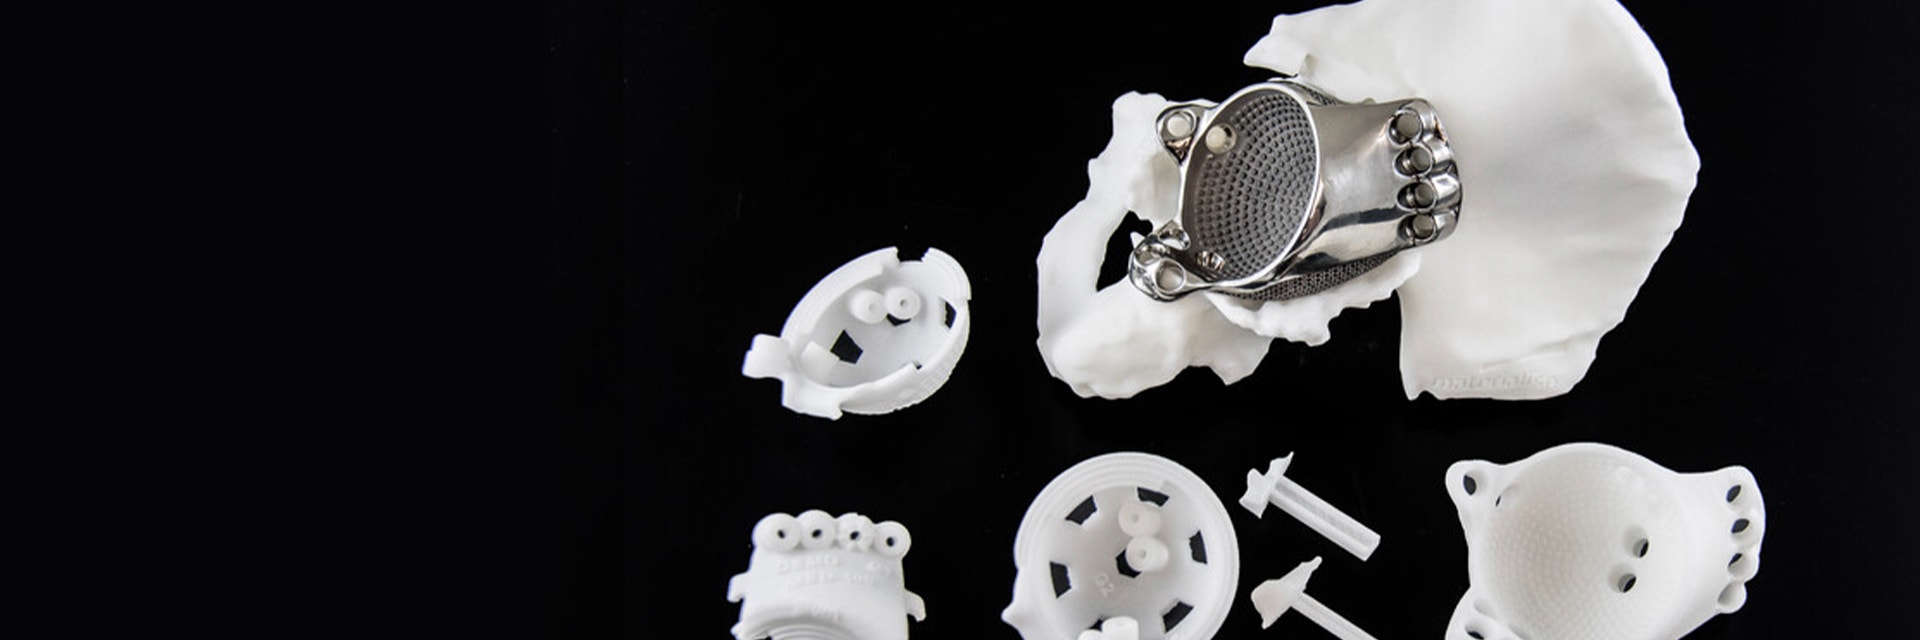 3D-printed implant in a hip model next to 3D-printed surgical guides